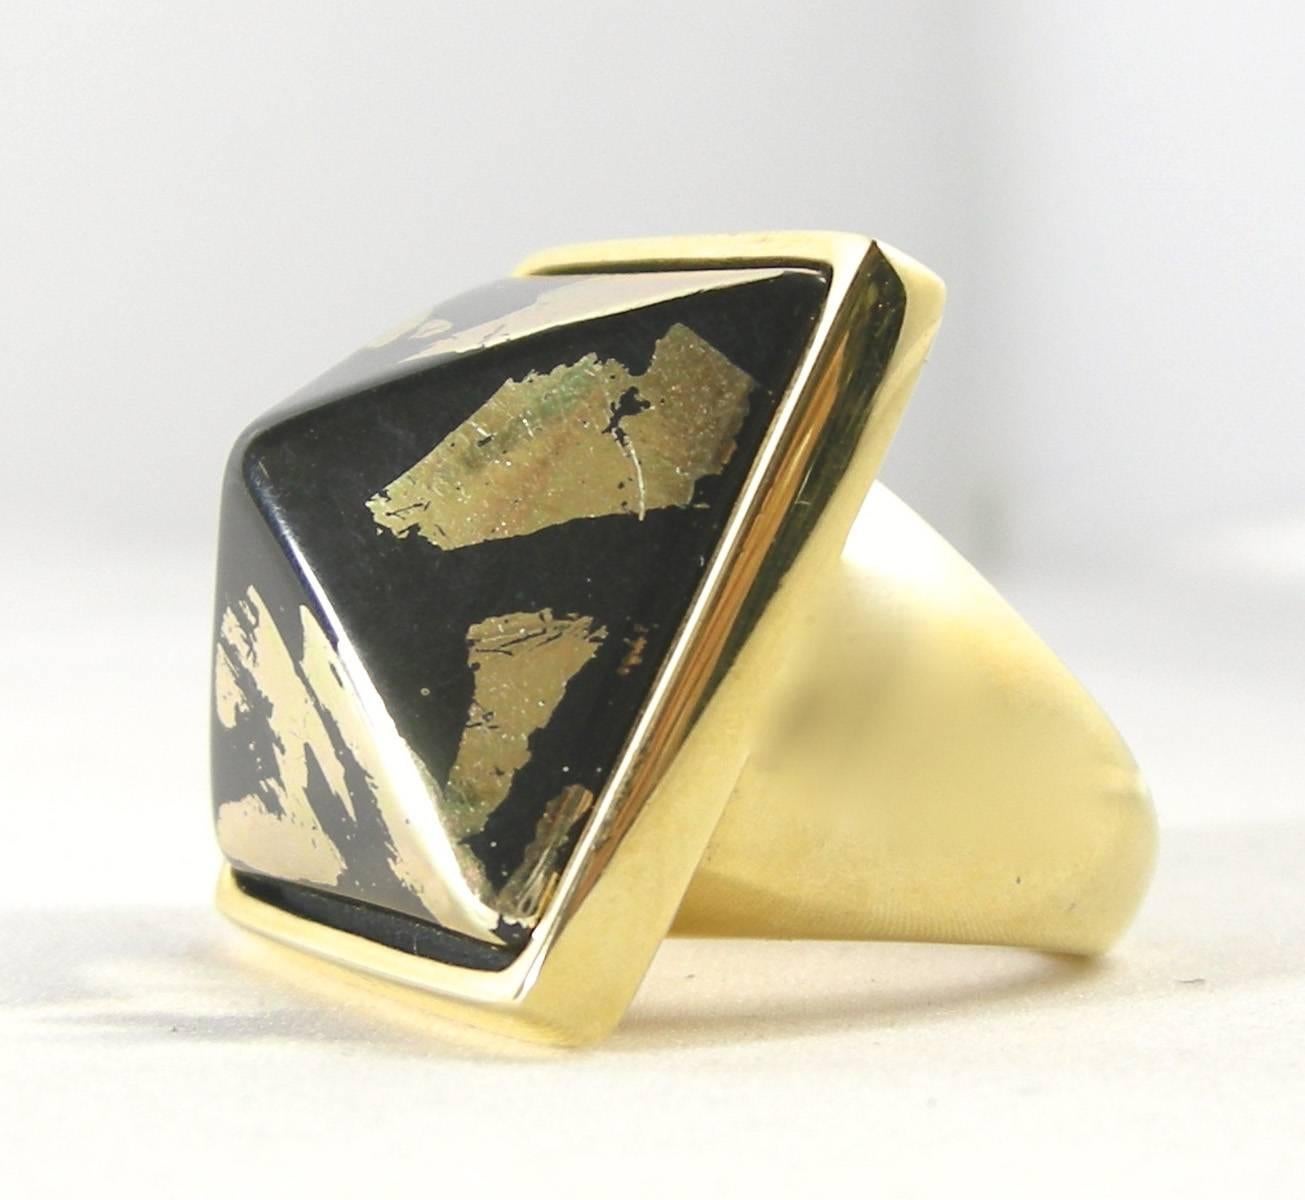 This unusual ring by Kenneth Jay Lane is rare and forms a Pyramid giving an illusion of gold melting into black creating a mystical design.  It is in a gold tone setting and measures 1-¾” x 1”.  It is signed “Kenneth Lane” and can fit up to a size 8